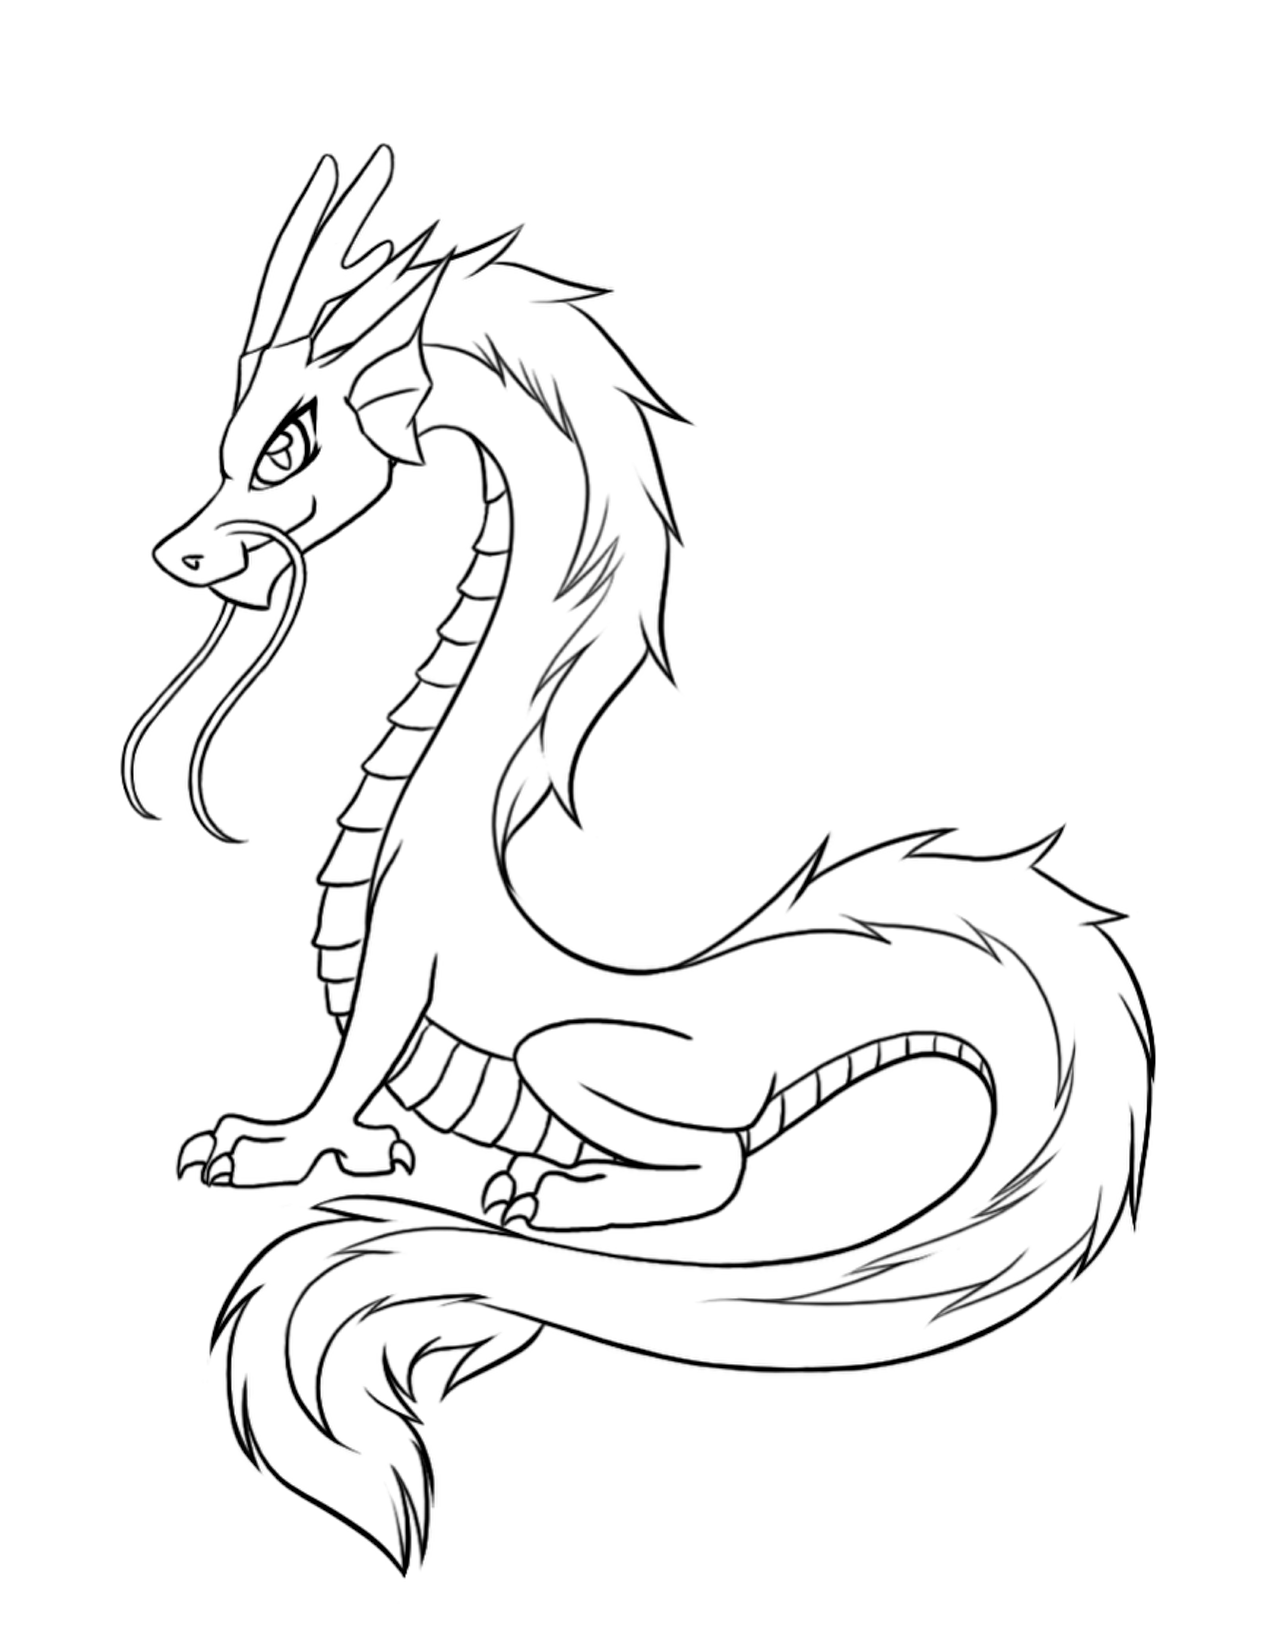 Realistic Dragon Coloring Pages at GetDrawings Free download